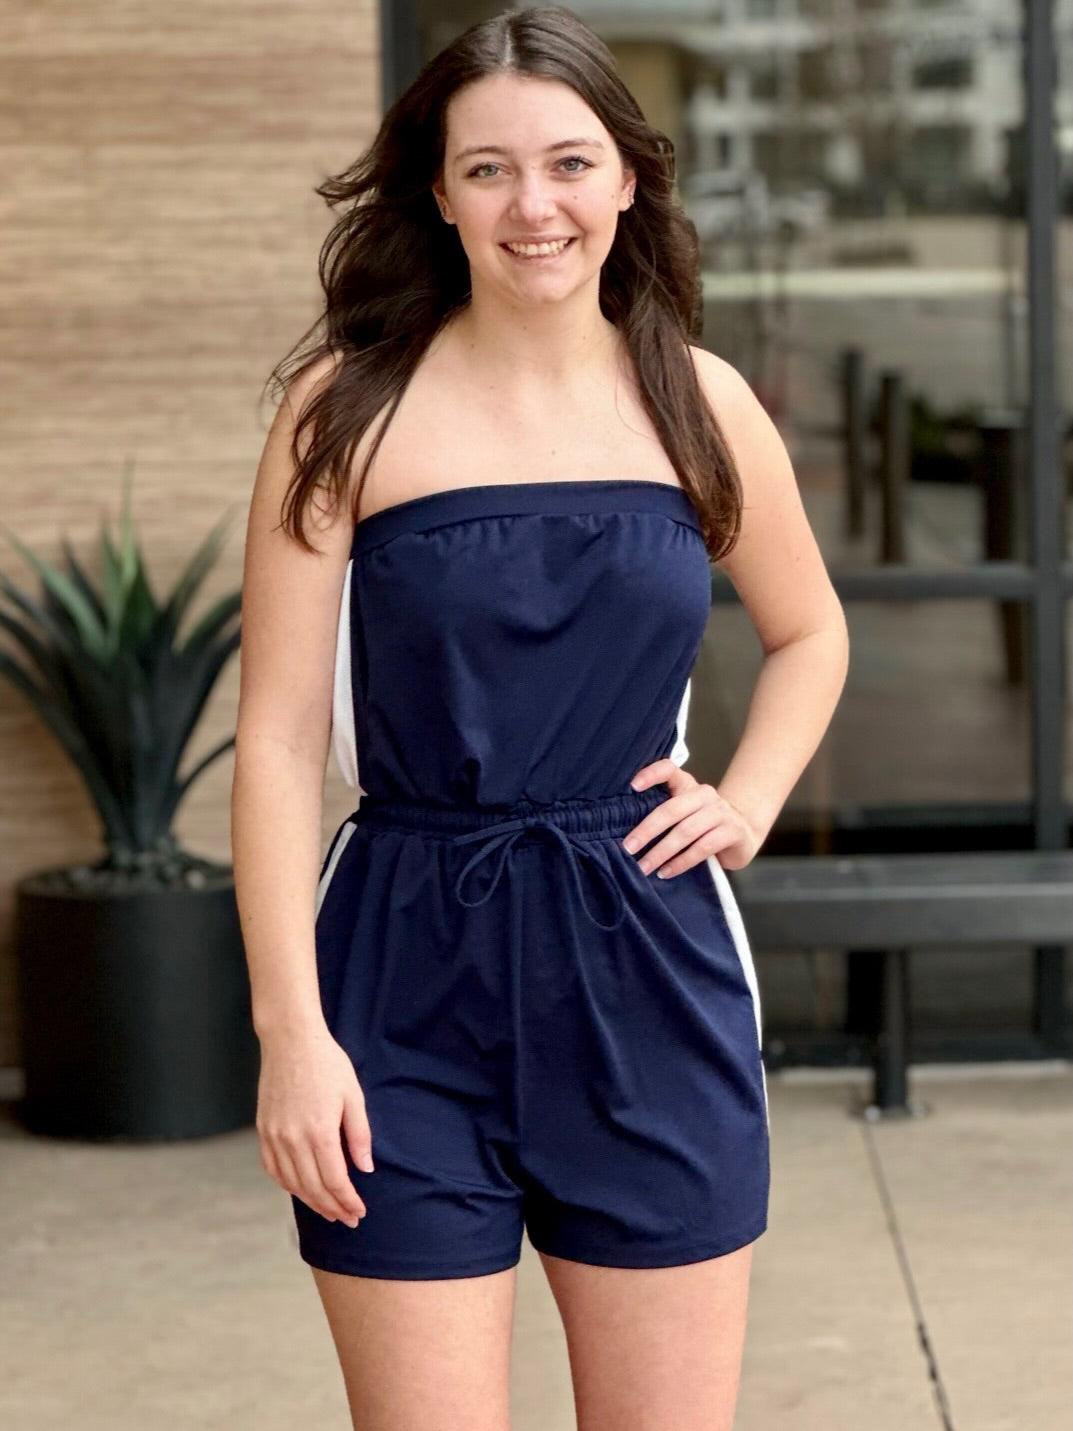 Megan in navy jumpsuit smiling front view